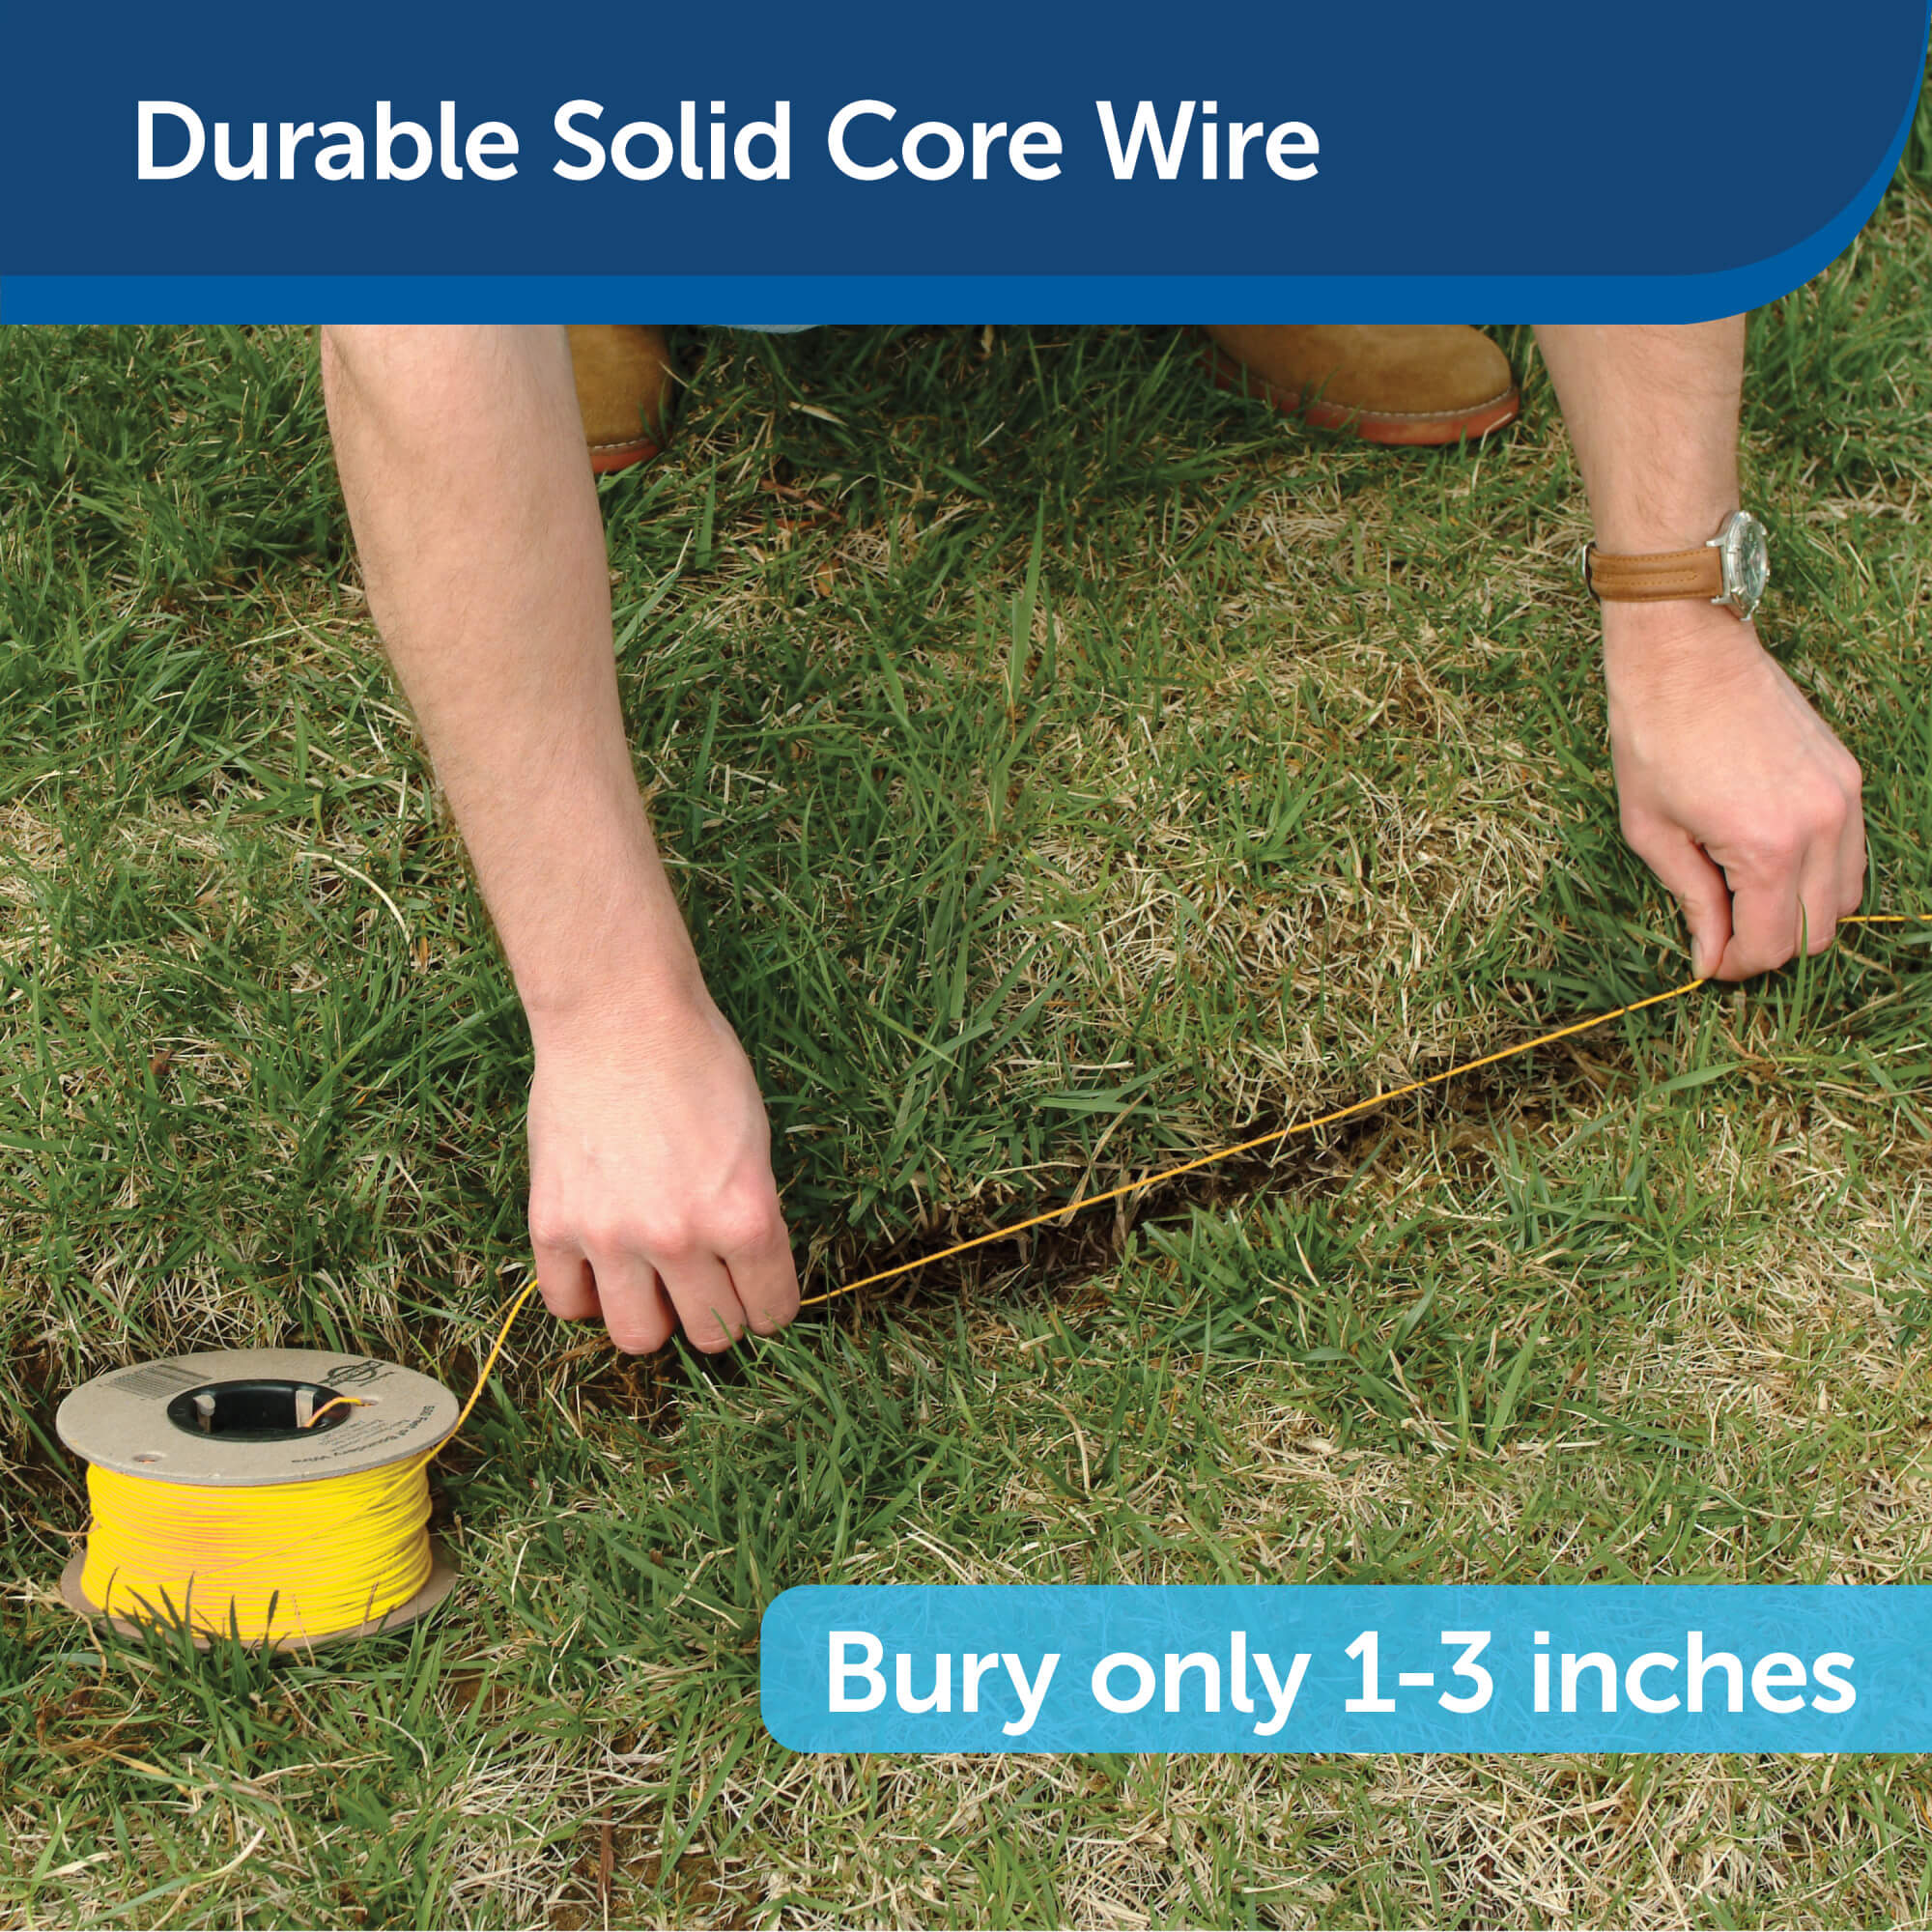 Durable solid core wire